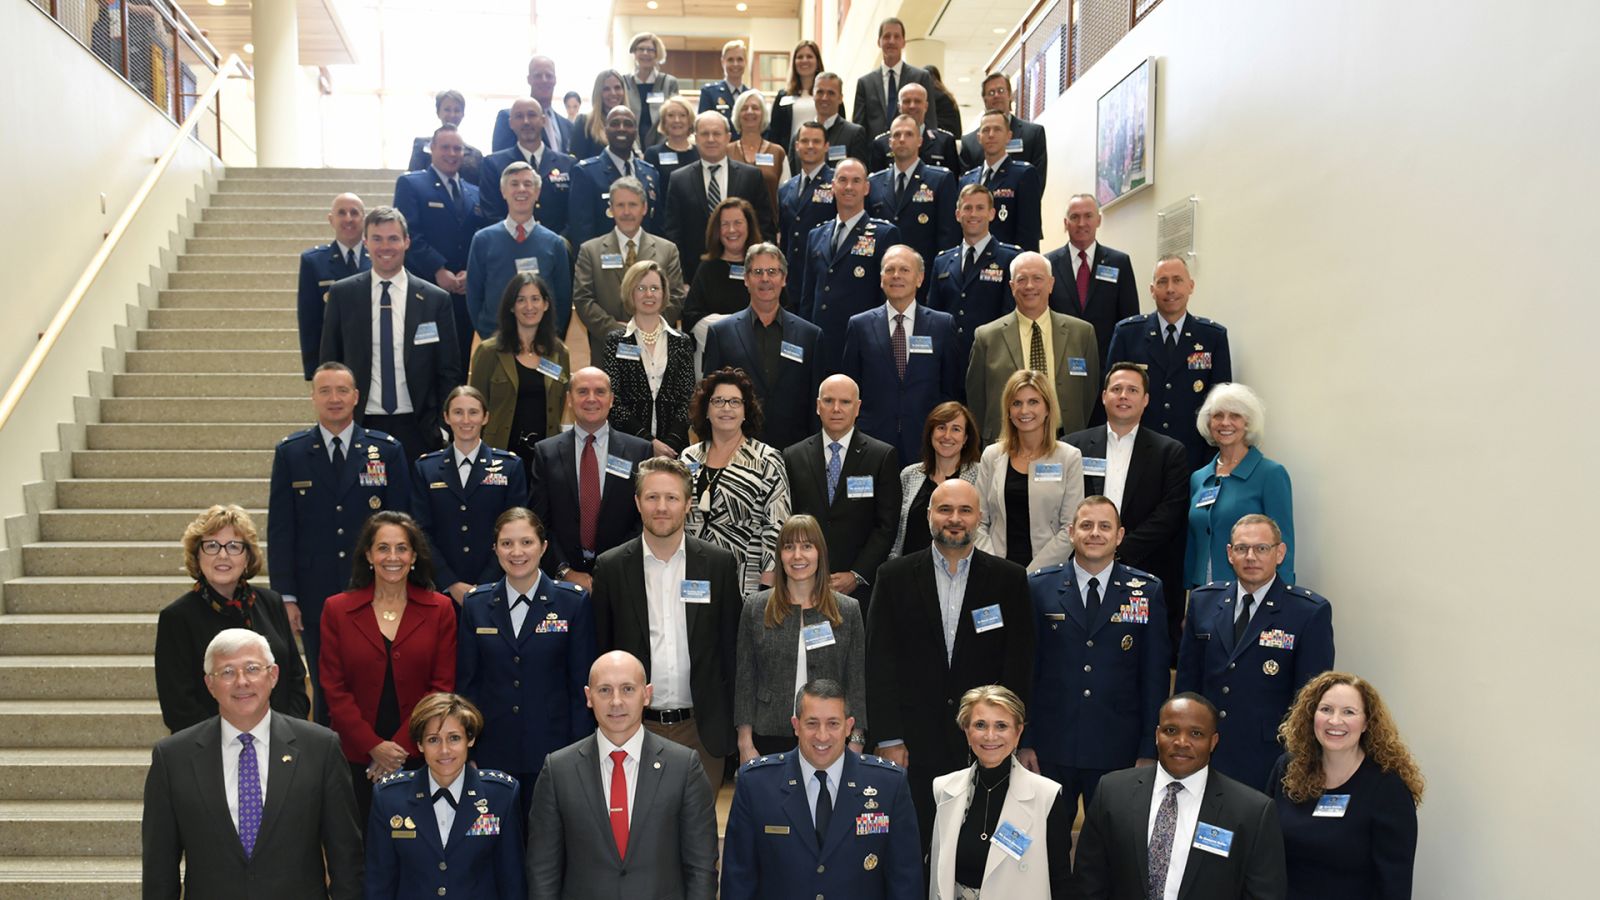 Mesut Akdere (second row from bottom, third from right) with other participants at the National Security Scholars Conference